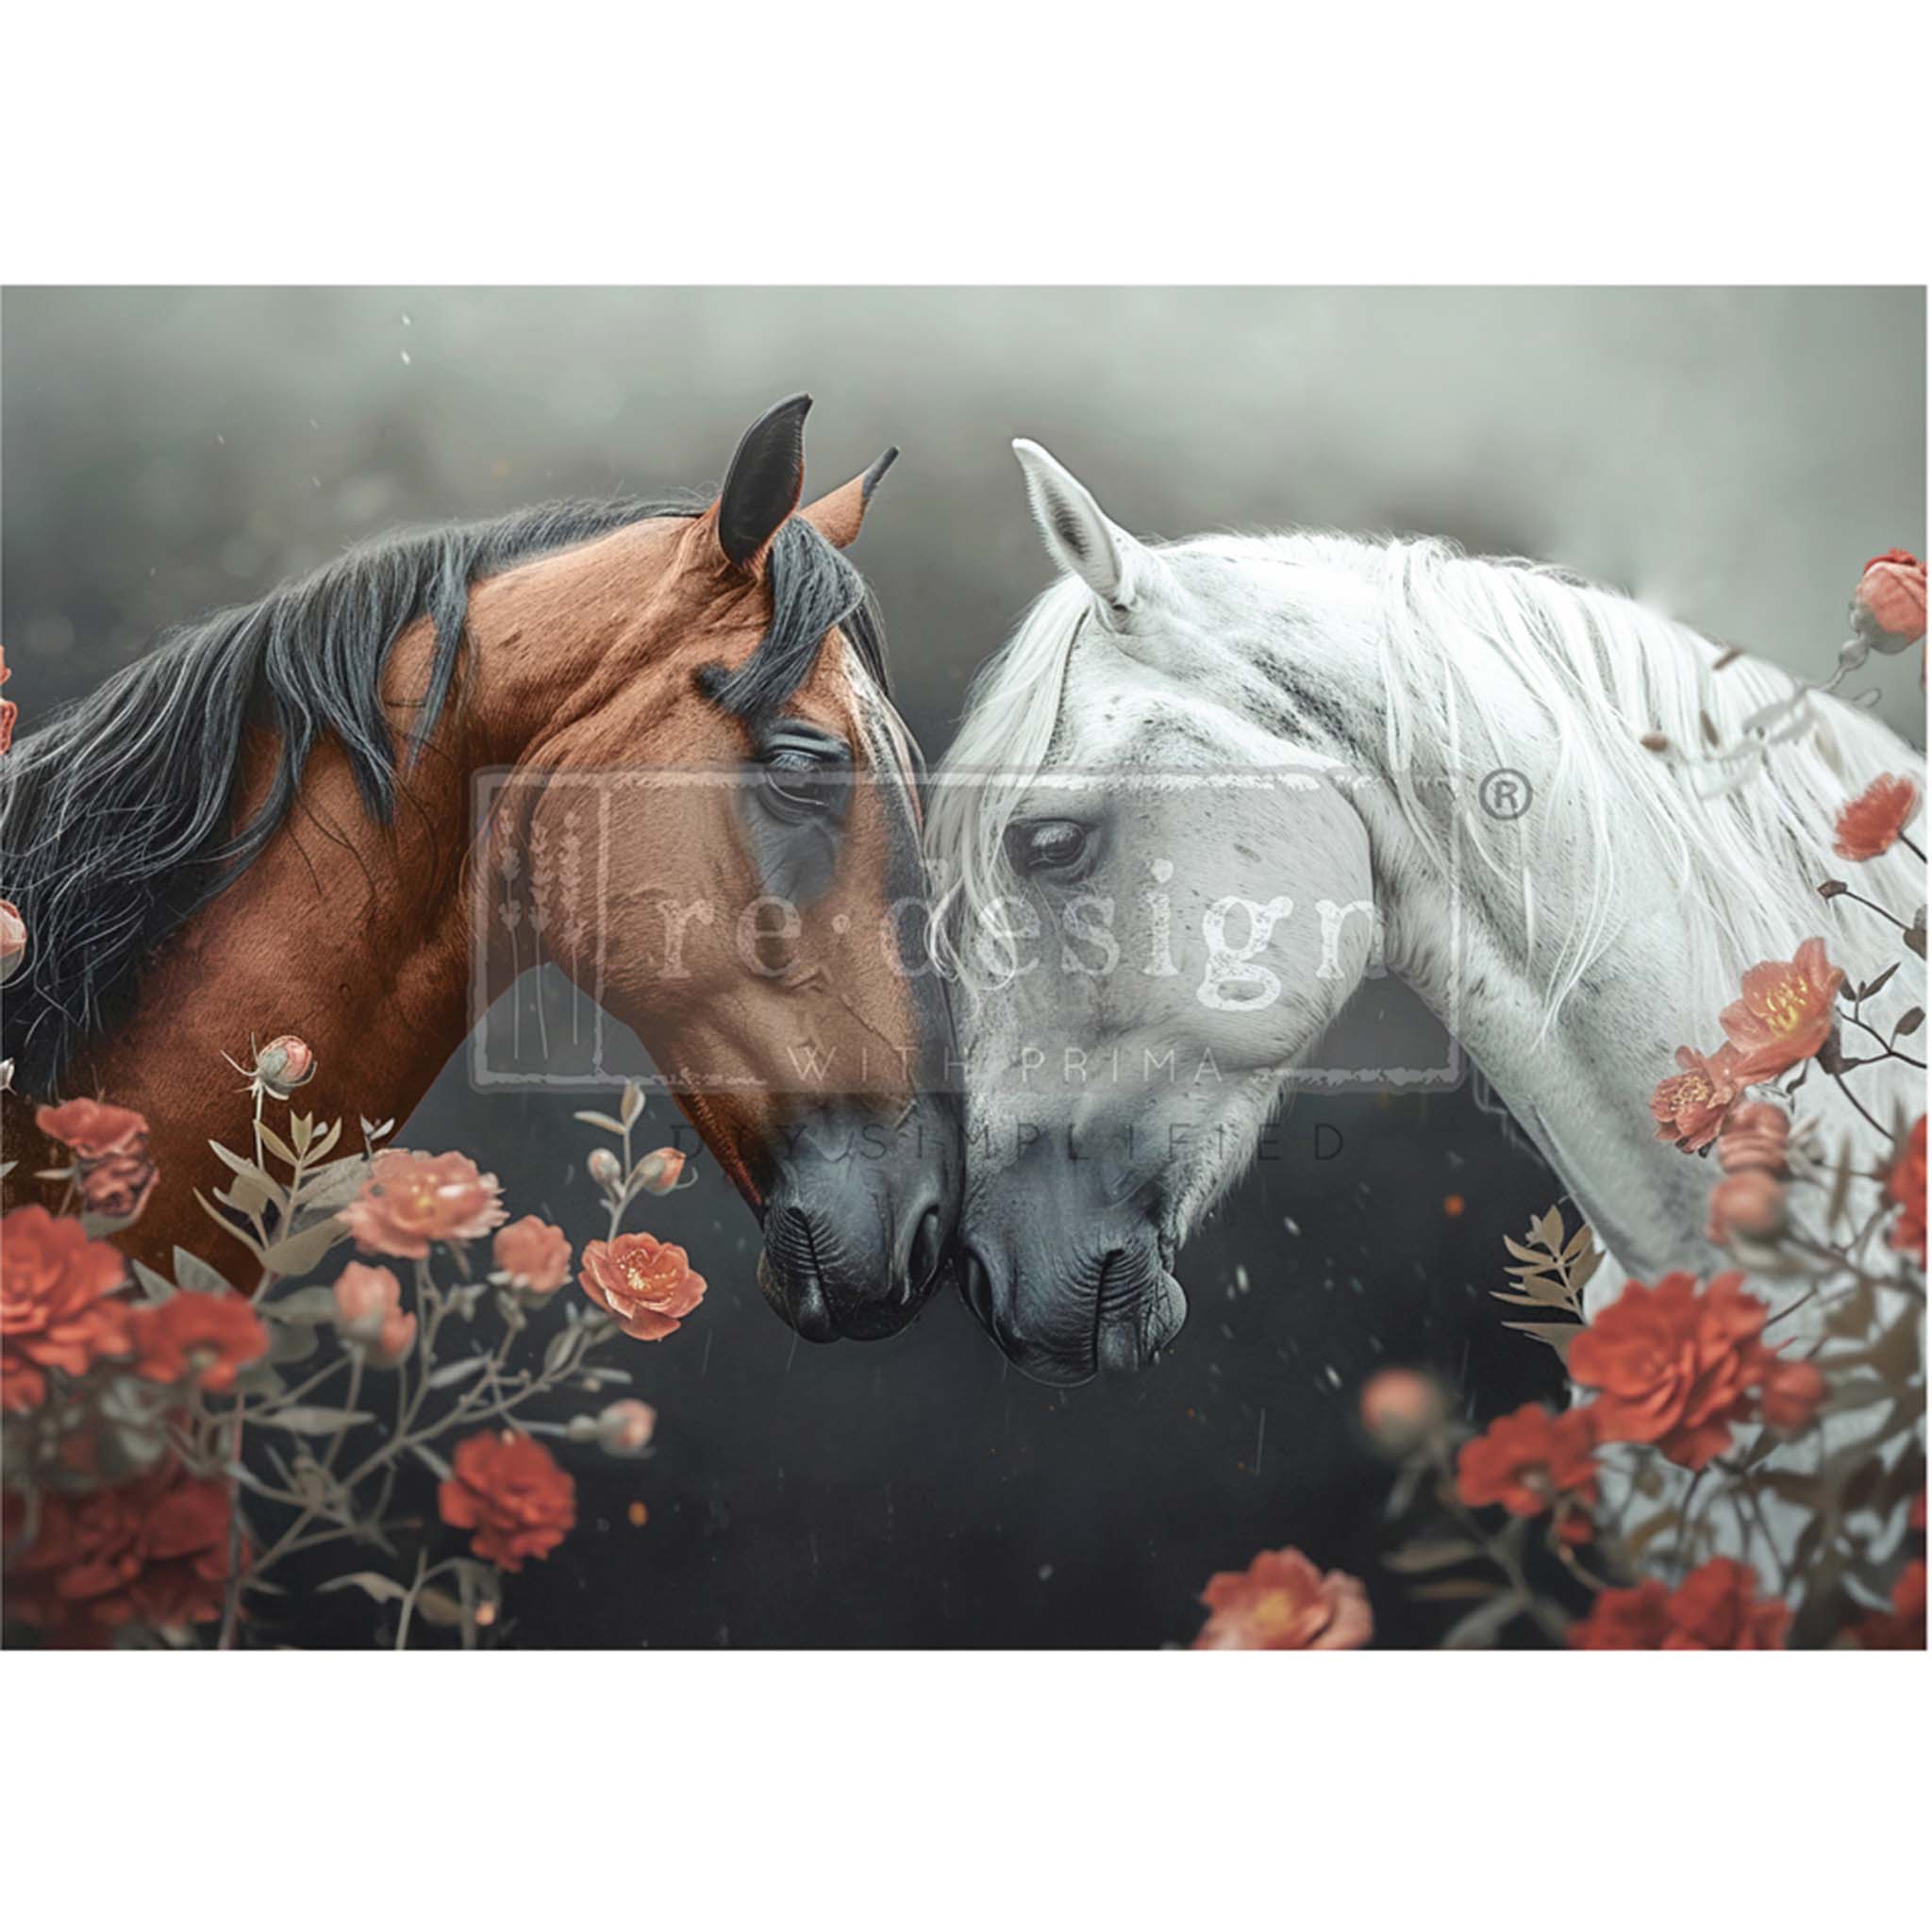 A1 fiber paper design that features a heartwarming scene of a brown and white horse nuzzling amidst beautiful pink flowers. White borders are on the top and bottom.